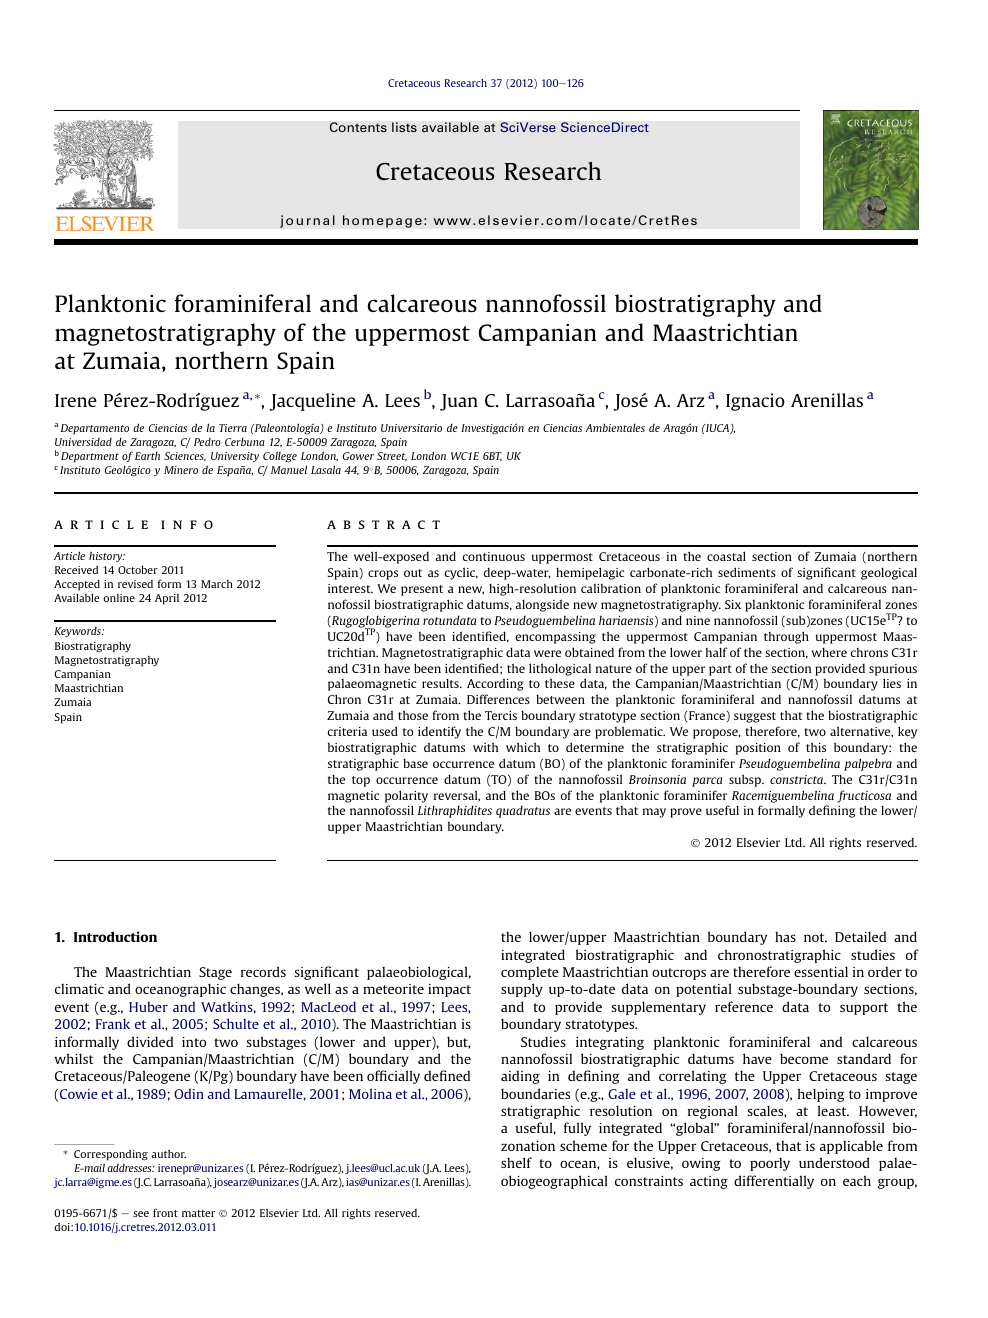 Planktonic Foraminiferal And Calcareous Nannofossil Biostratigraphy And Magnetostratigraphy Of The Uppermost Campanian And Maastrichtian At Zumaia Northern Spain Topic Of Research Paper In Earth And Related Environmental Sciences Download Scholarly